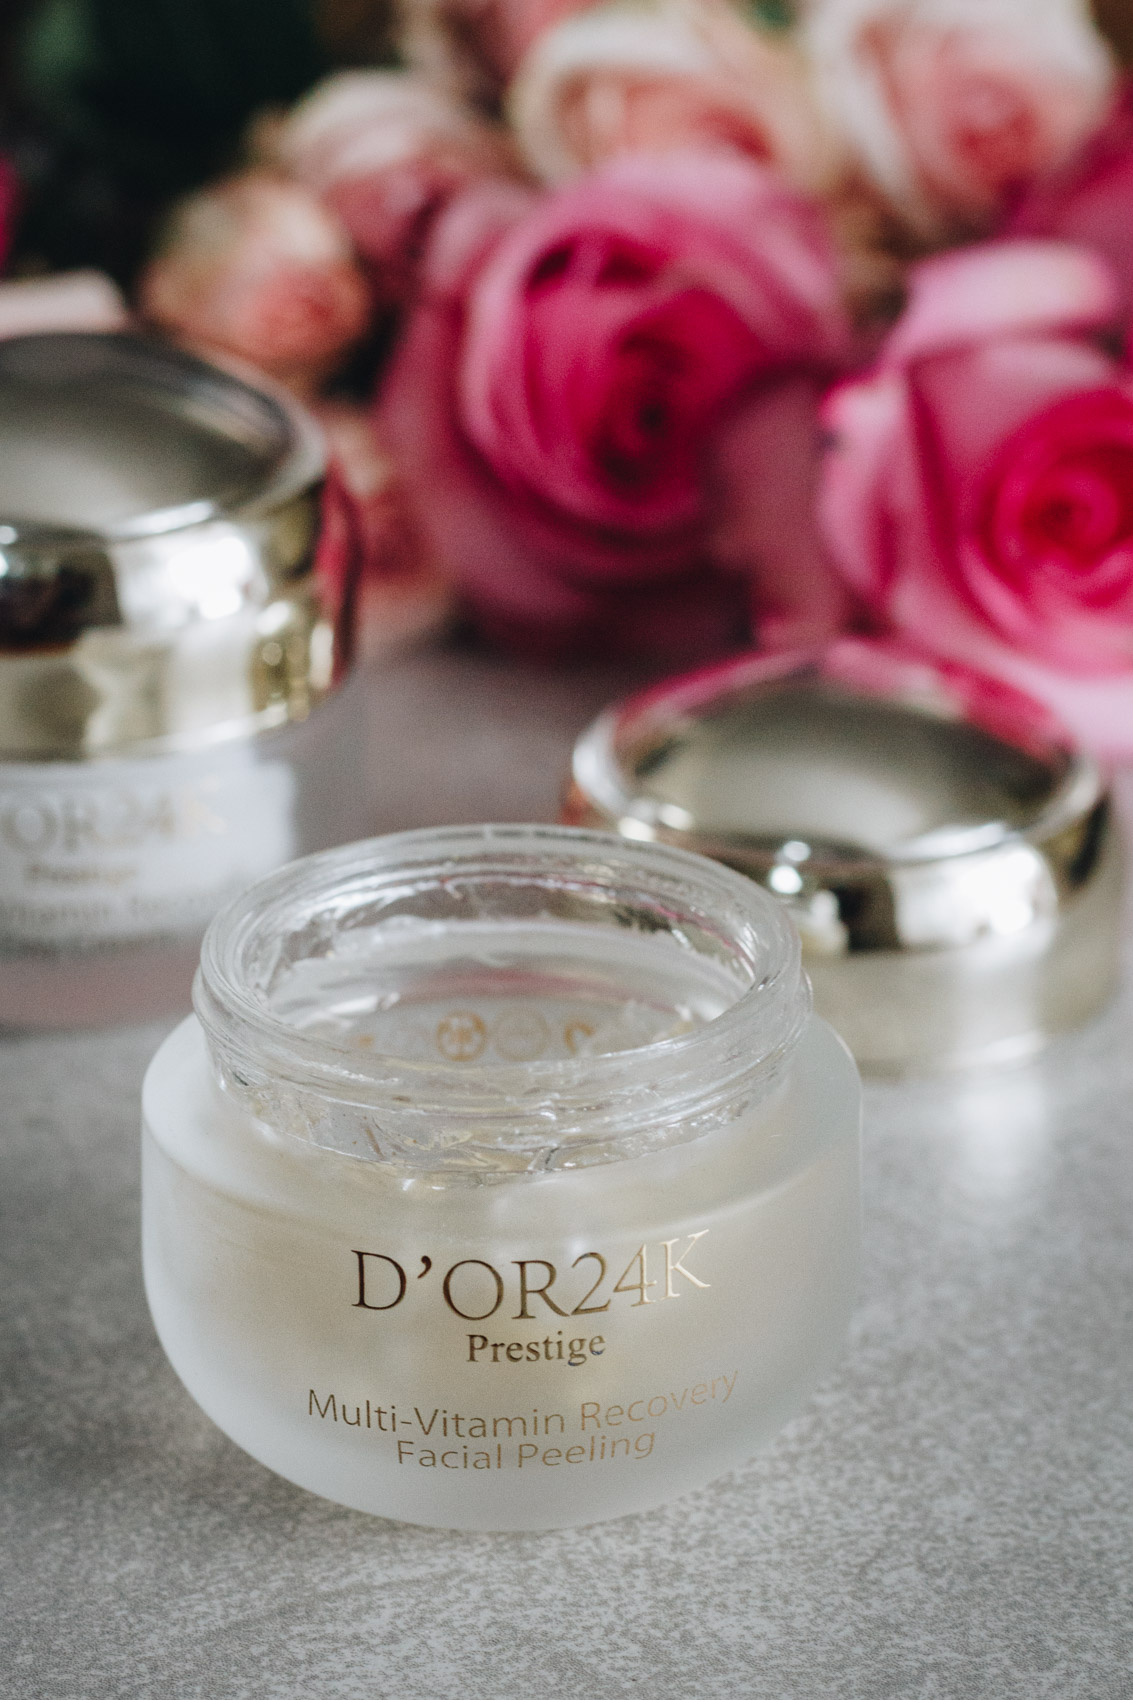 With all the love in the air, February is the perfect time of year to show yourself some extra TLC and indulge in a few necessary luxuries that make you feel on top of the world. D'or 24K makes a facial peel with 24 karat gold (along with other skin loving ingredients like green tea) and it is spectacular. 